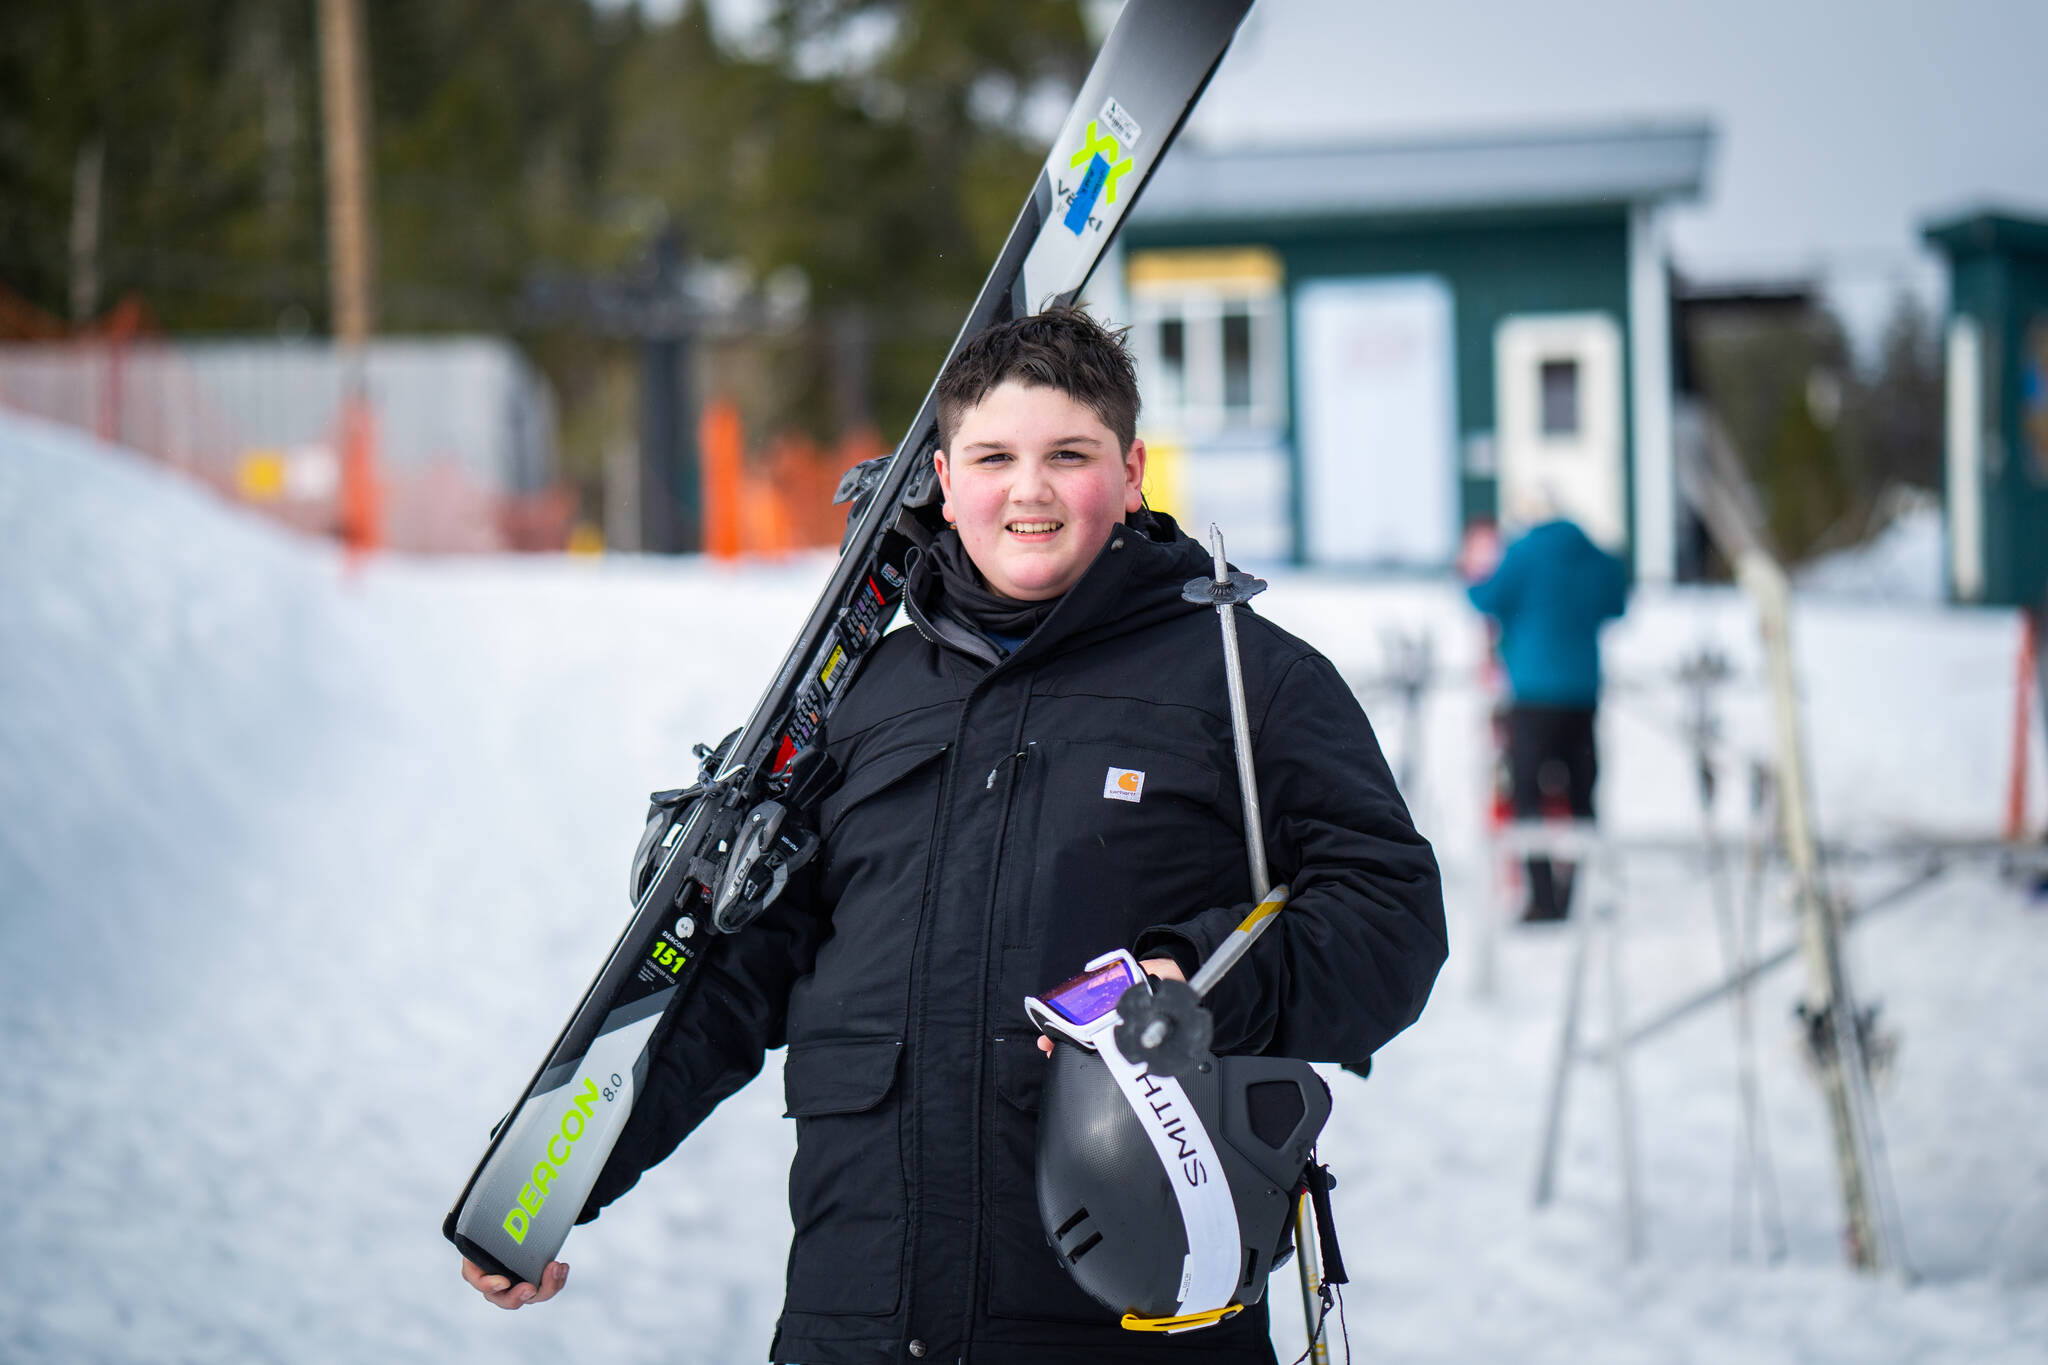 Photo by Lee House / Sitka Conservation Society
Judah Haven Marr stands with his skis before heading up to the chairlift.